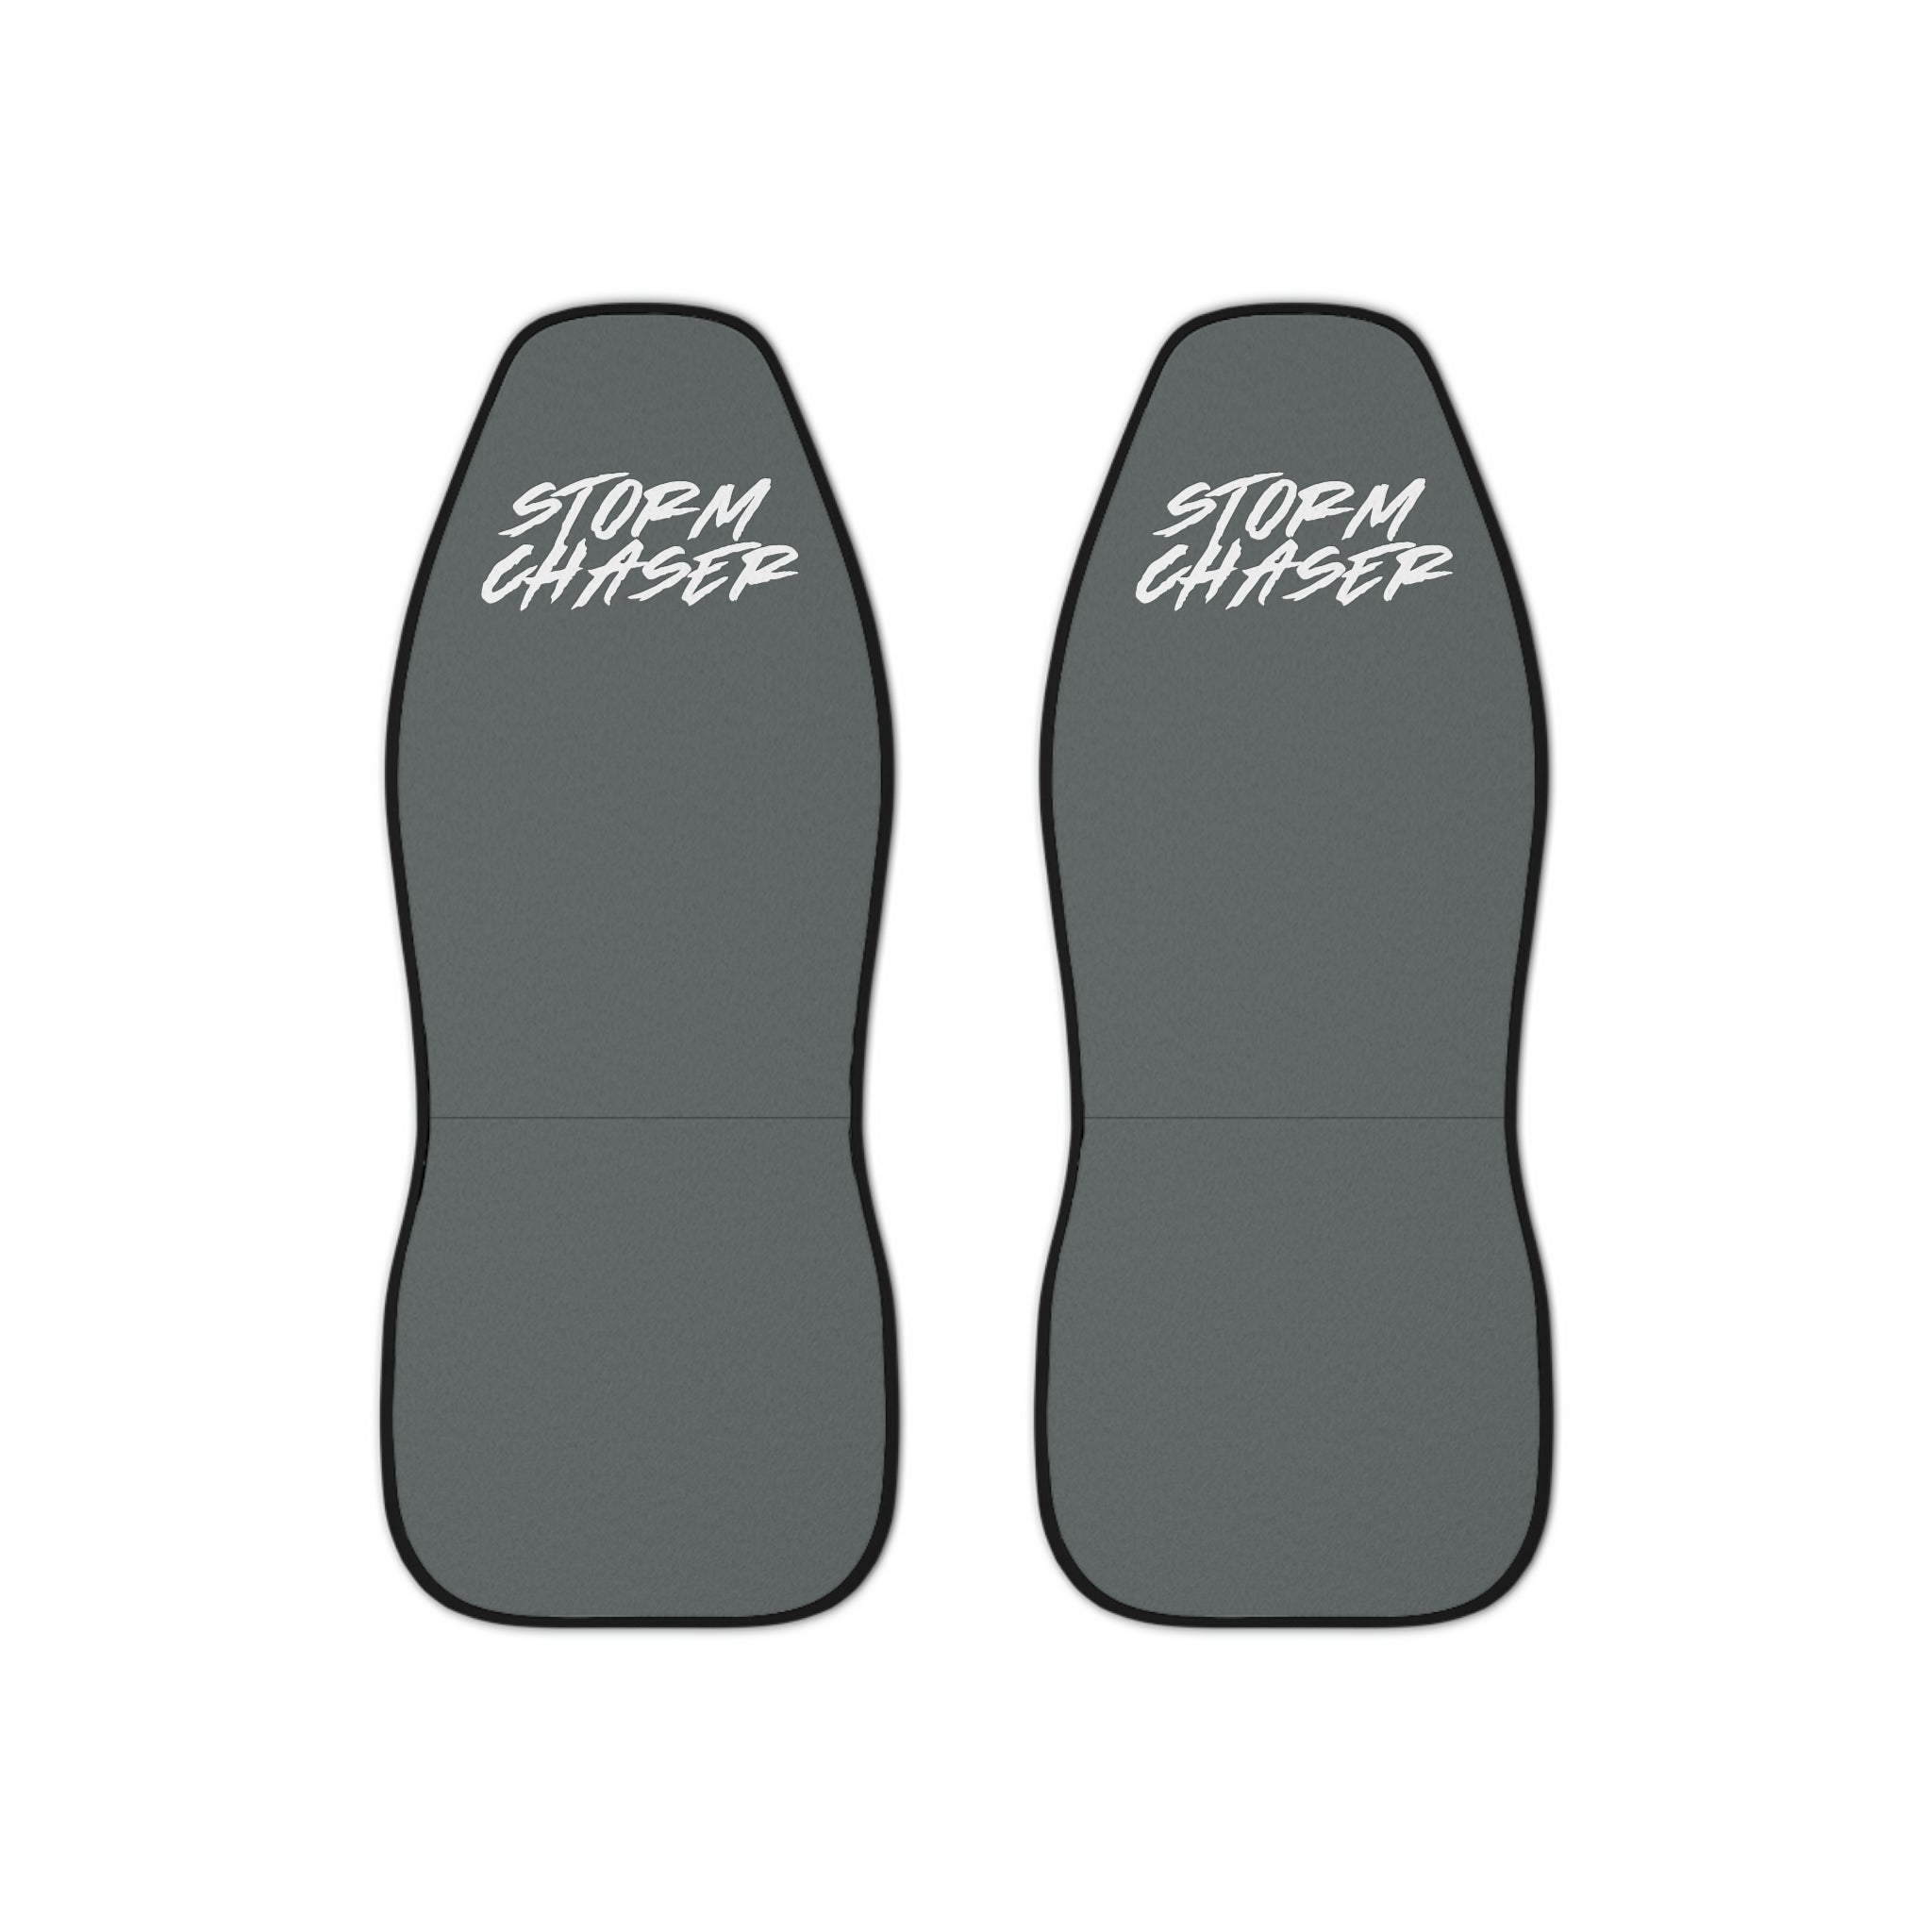 Storm Chaser (Gray) Car Seat Covers 